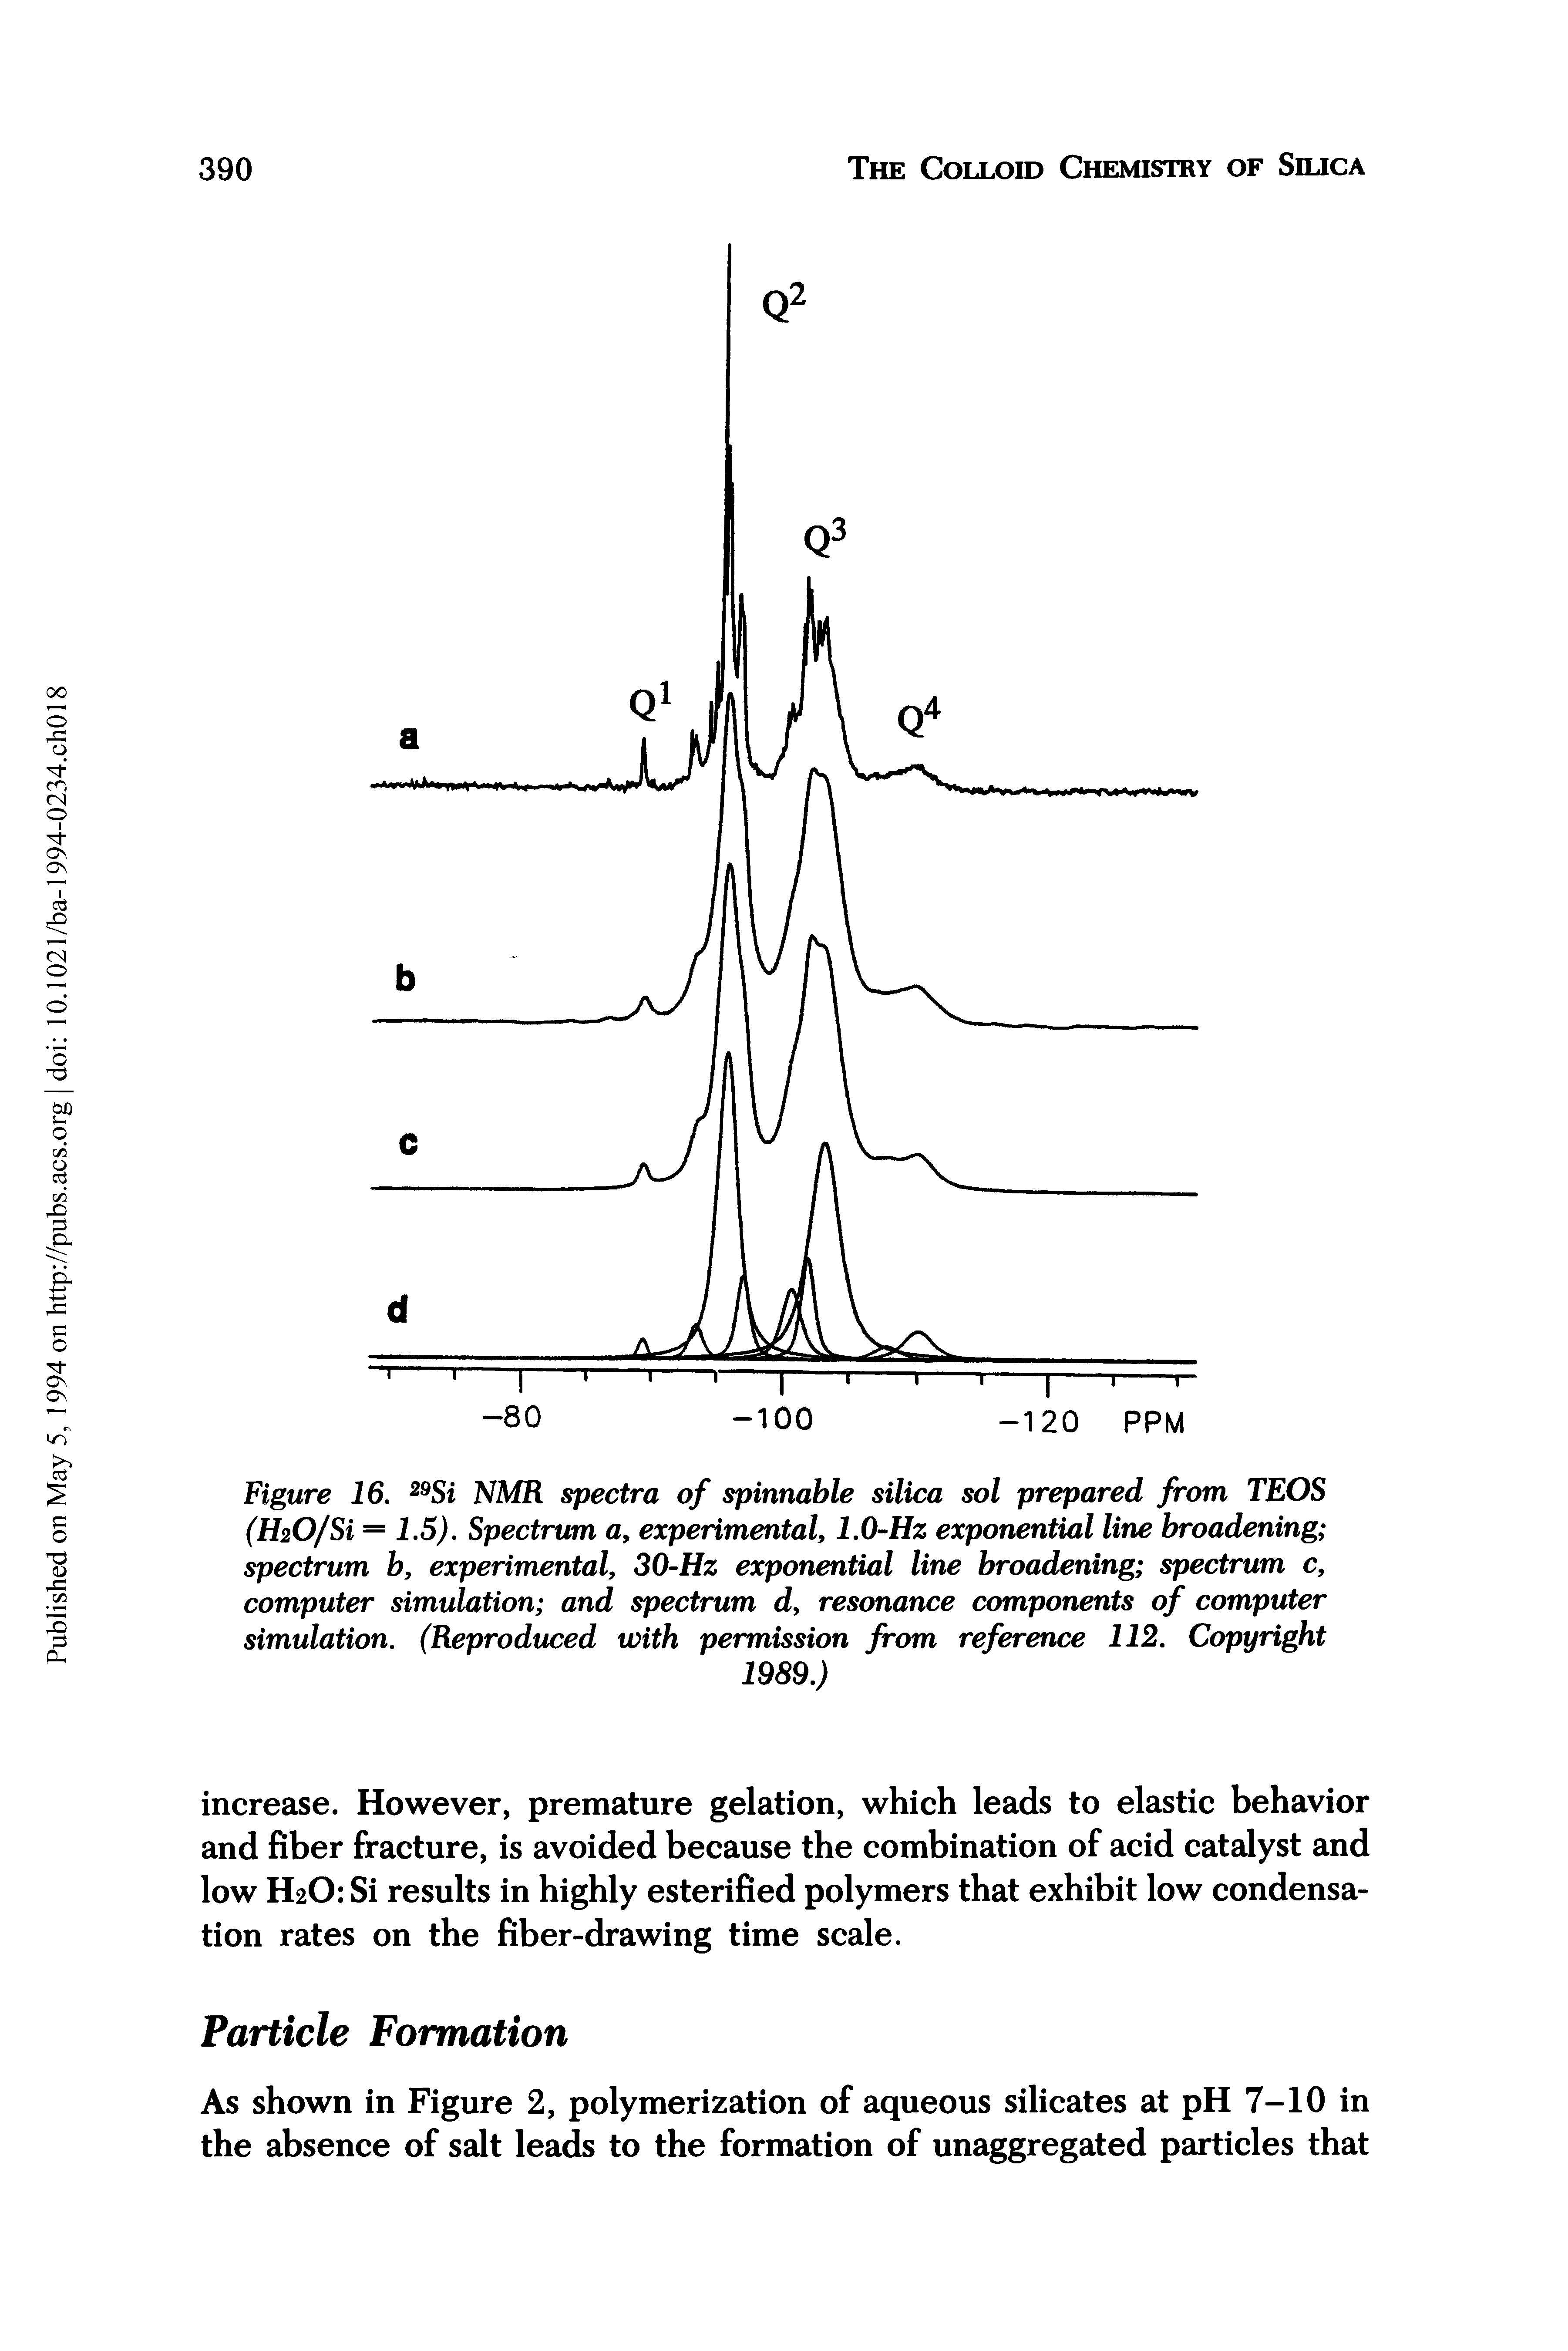 Figure 16. 29Si NMR spectra of spinnable silica sol prepared from TEOS (HsO/Si =1.5). Spectrum a, experimental, 1.0-Hz exponential line broadening spectrum b, experimental, 30-Hz exponential line broadening spectrum c, computer simulation and spectrum d, resonance components of computer simulation. (Reproduced with permission from reference 112. Copyright...